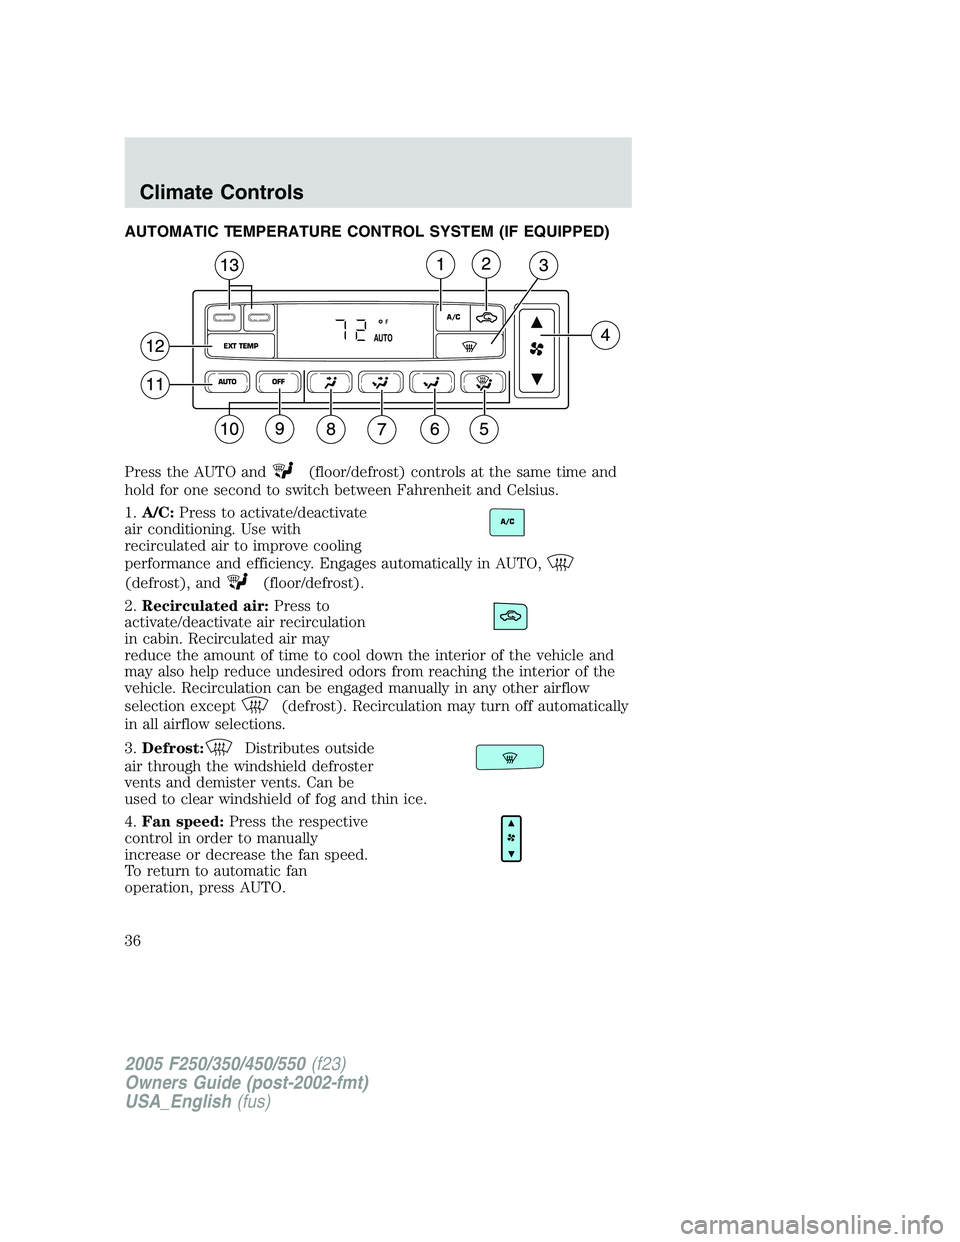 FORD F250 2005  Owners Manual AUTOMATIC TEMPERATURE CONTROL SYSTEM (IF EQUIPPED)
Press the AUTO and
(floor/defrost) controls at the same time and
hold for one second to switch between Fahrenheit and Celsius.
1.A/C:Press to activat